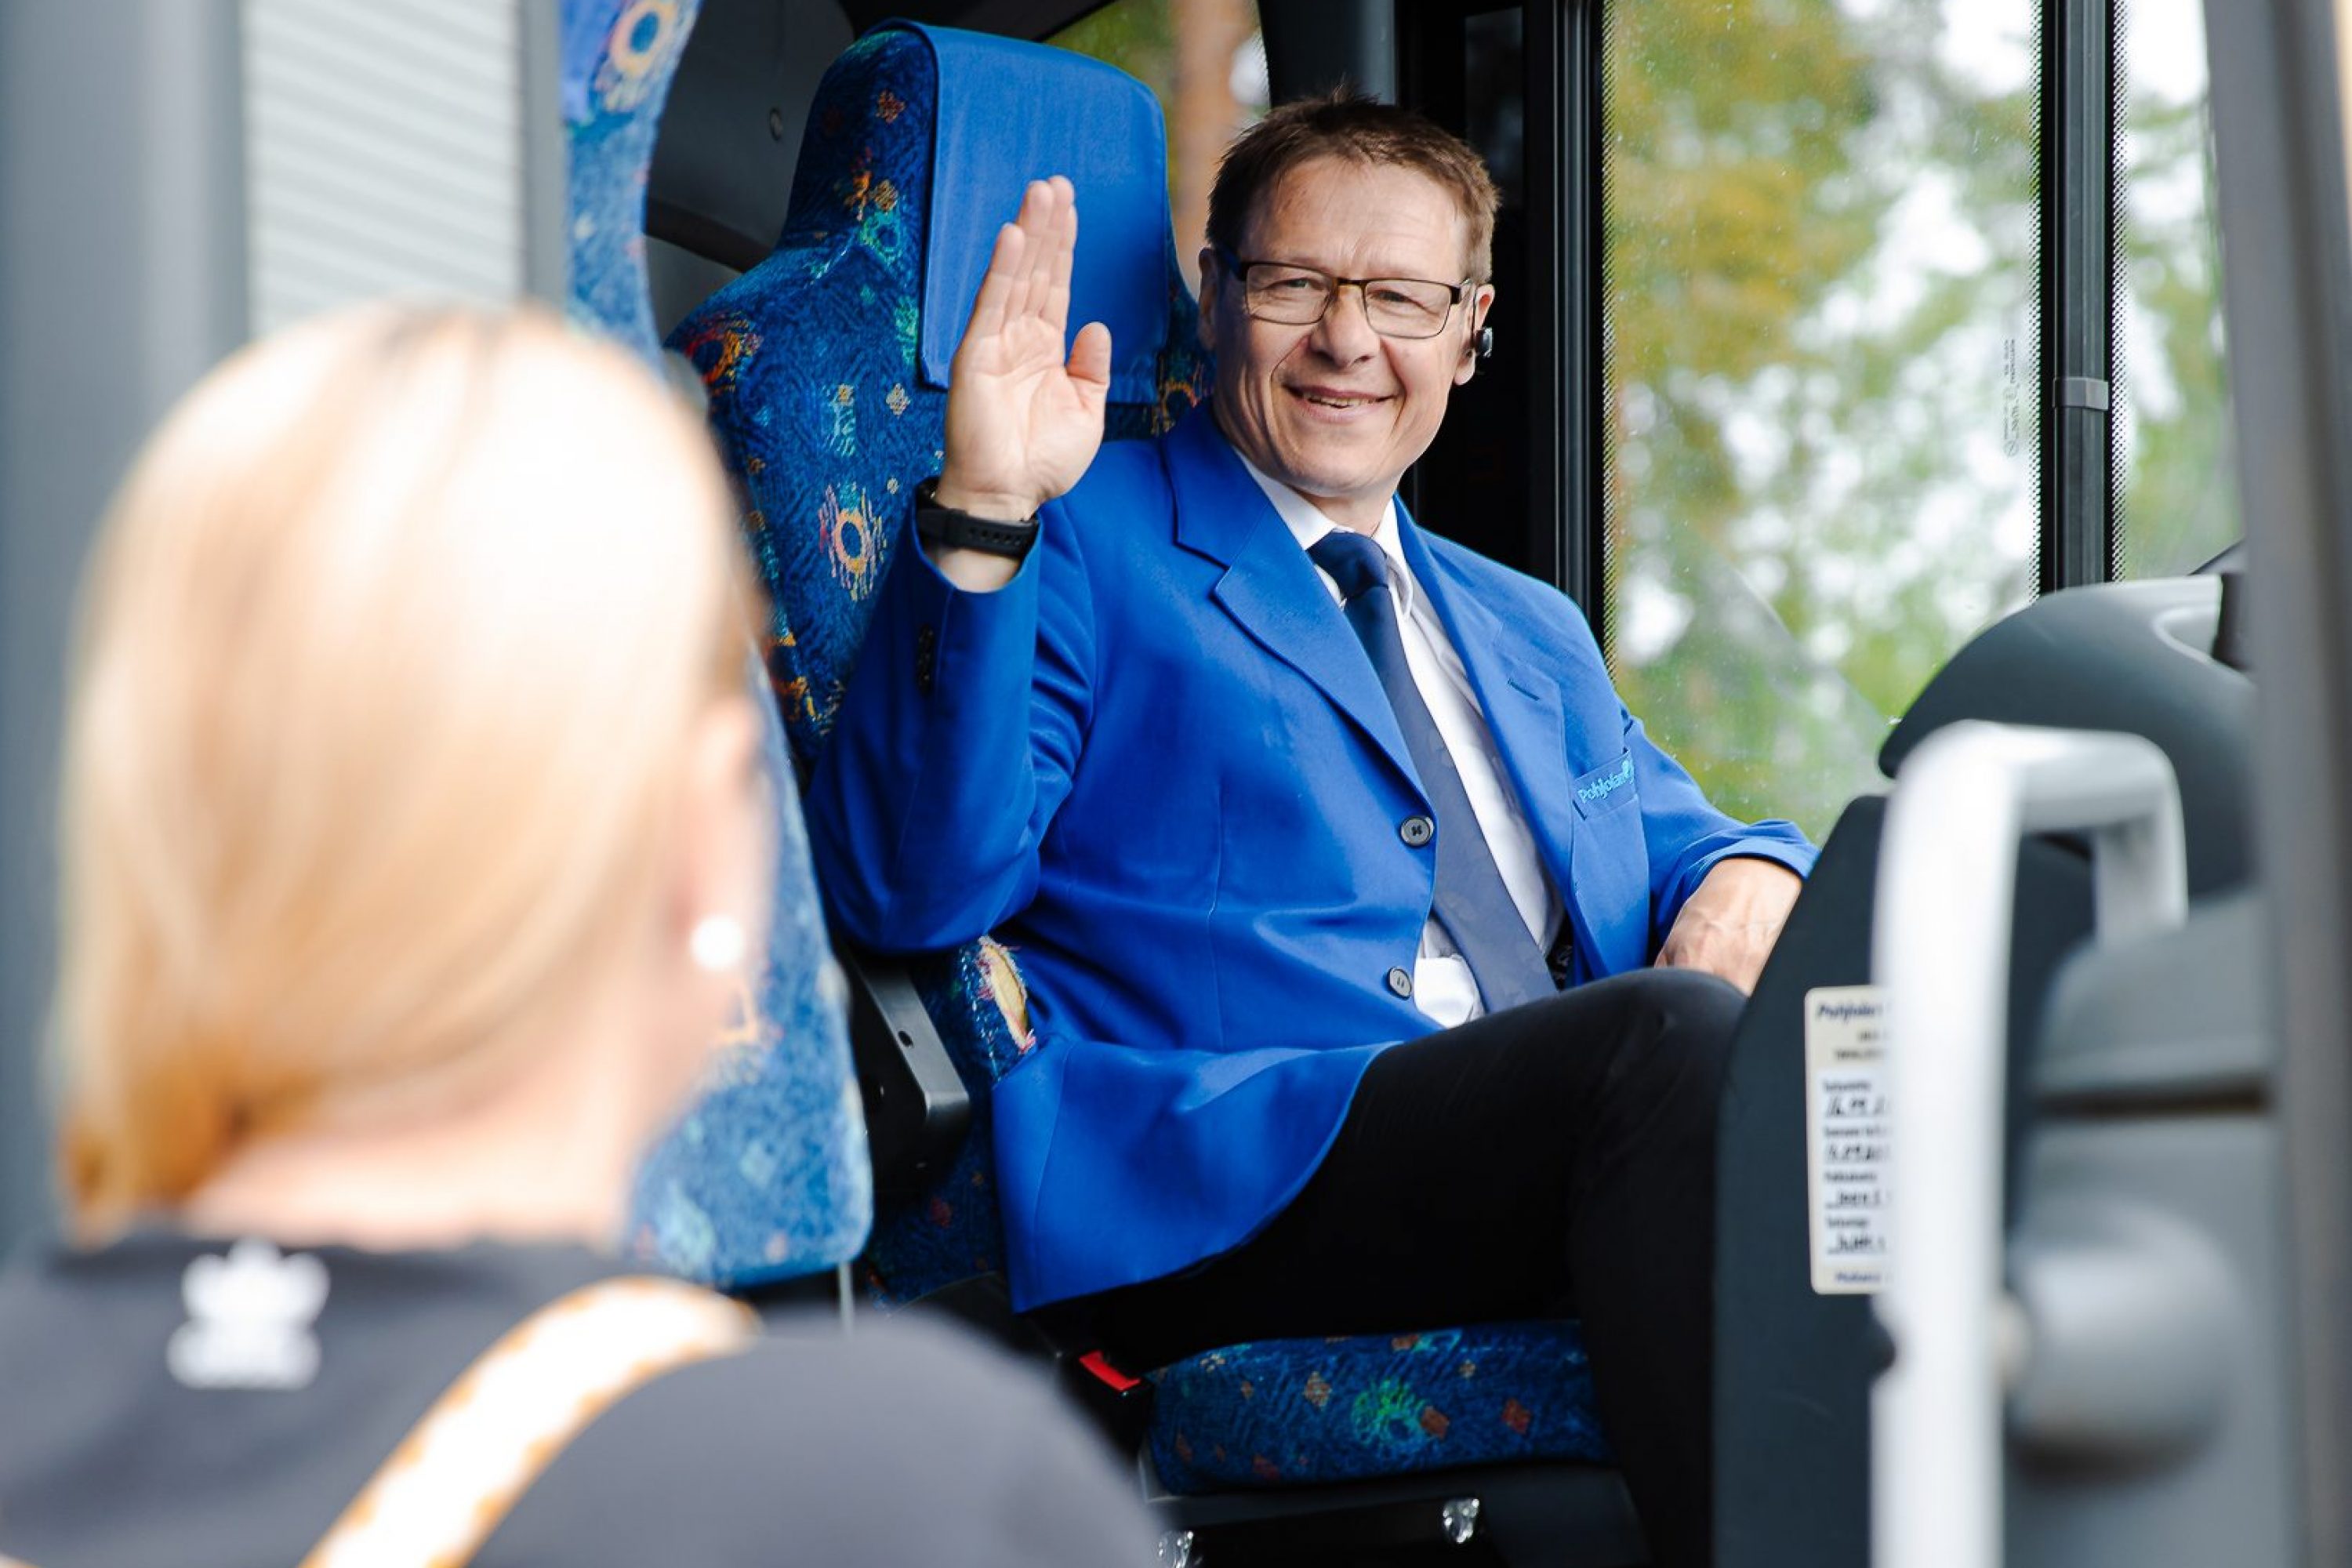 A bus driver waves hand to customer